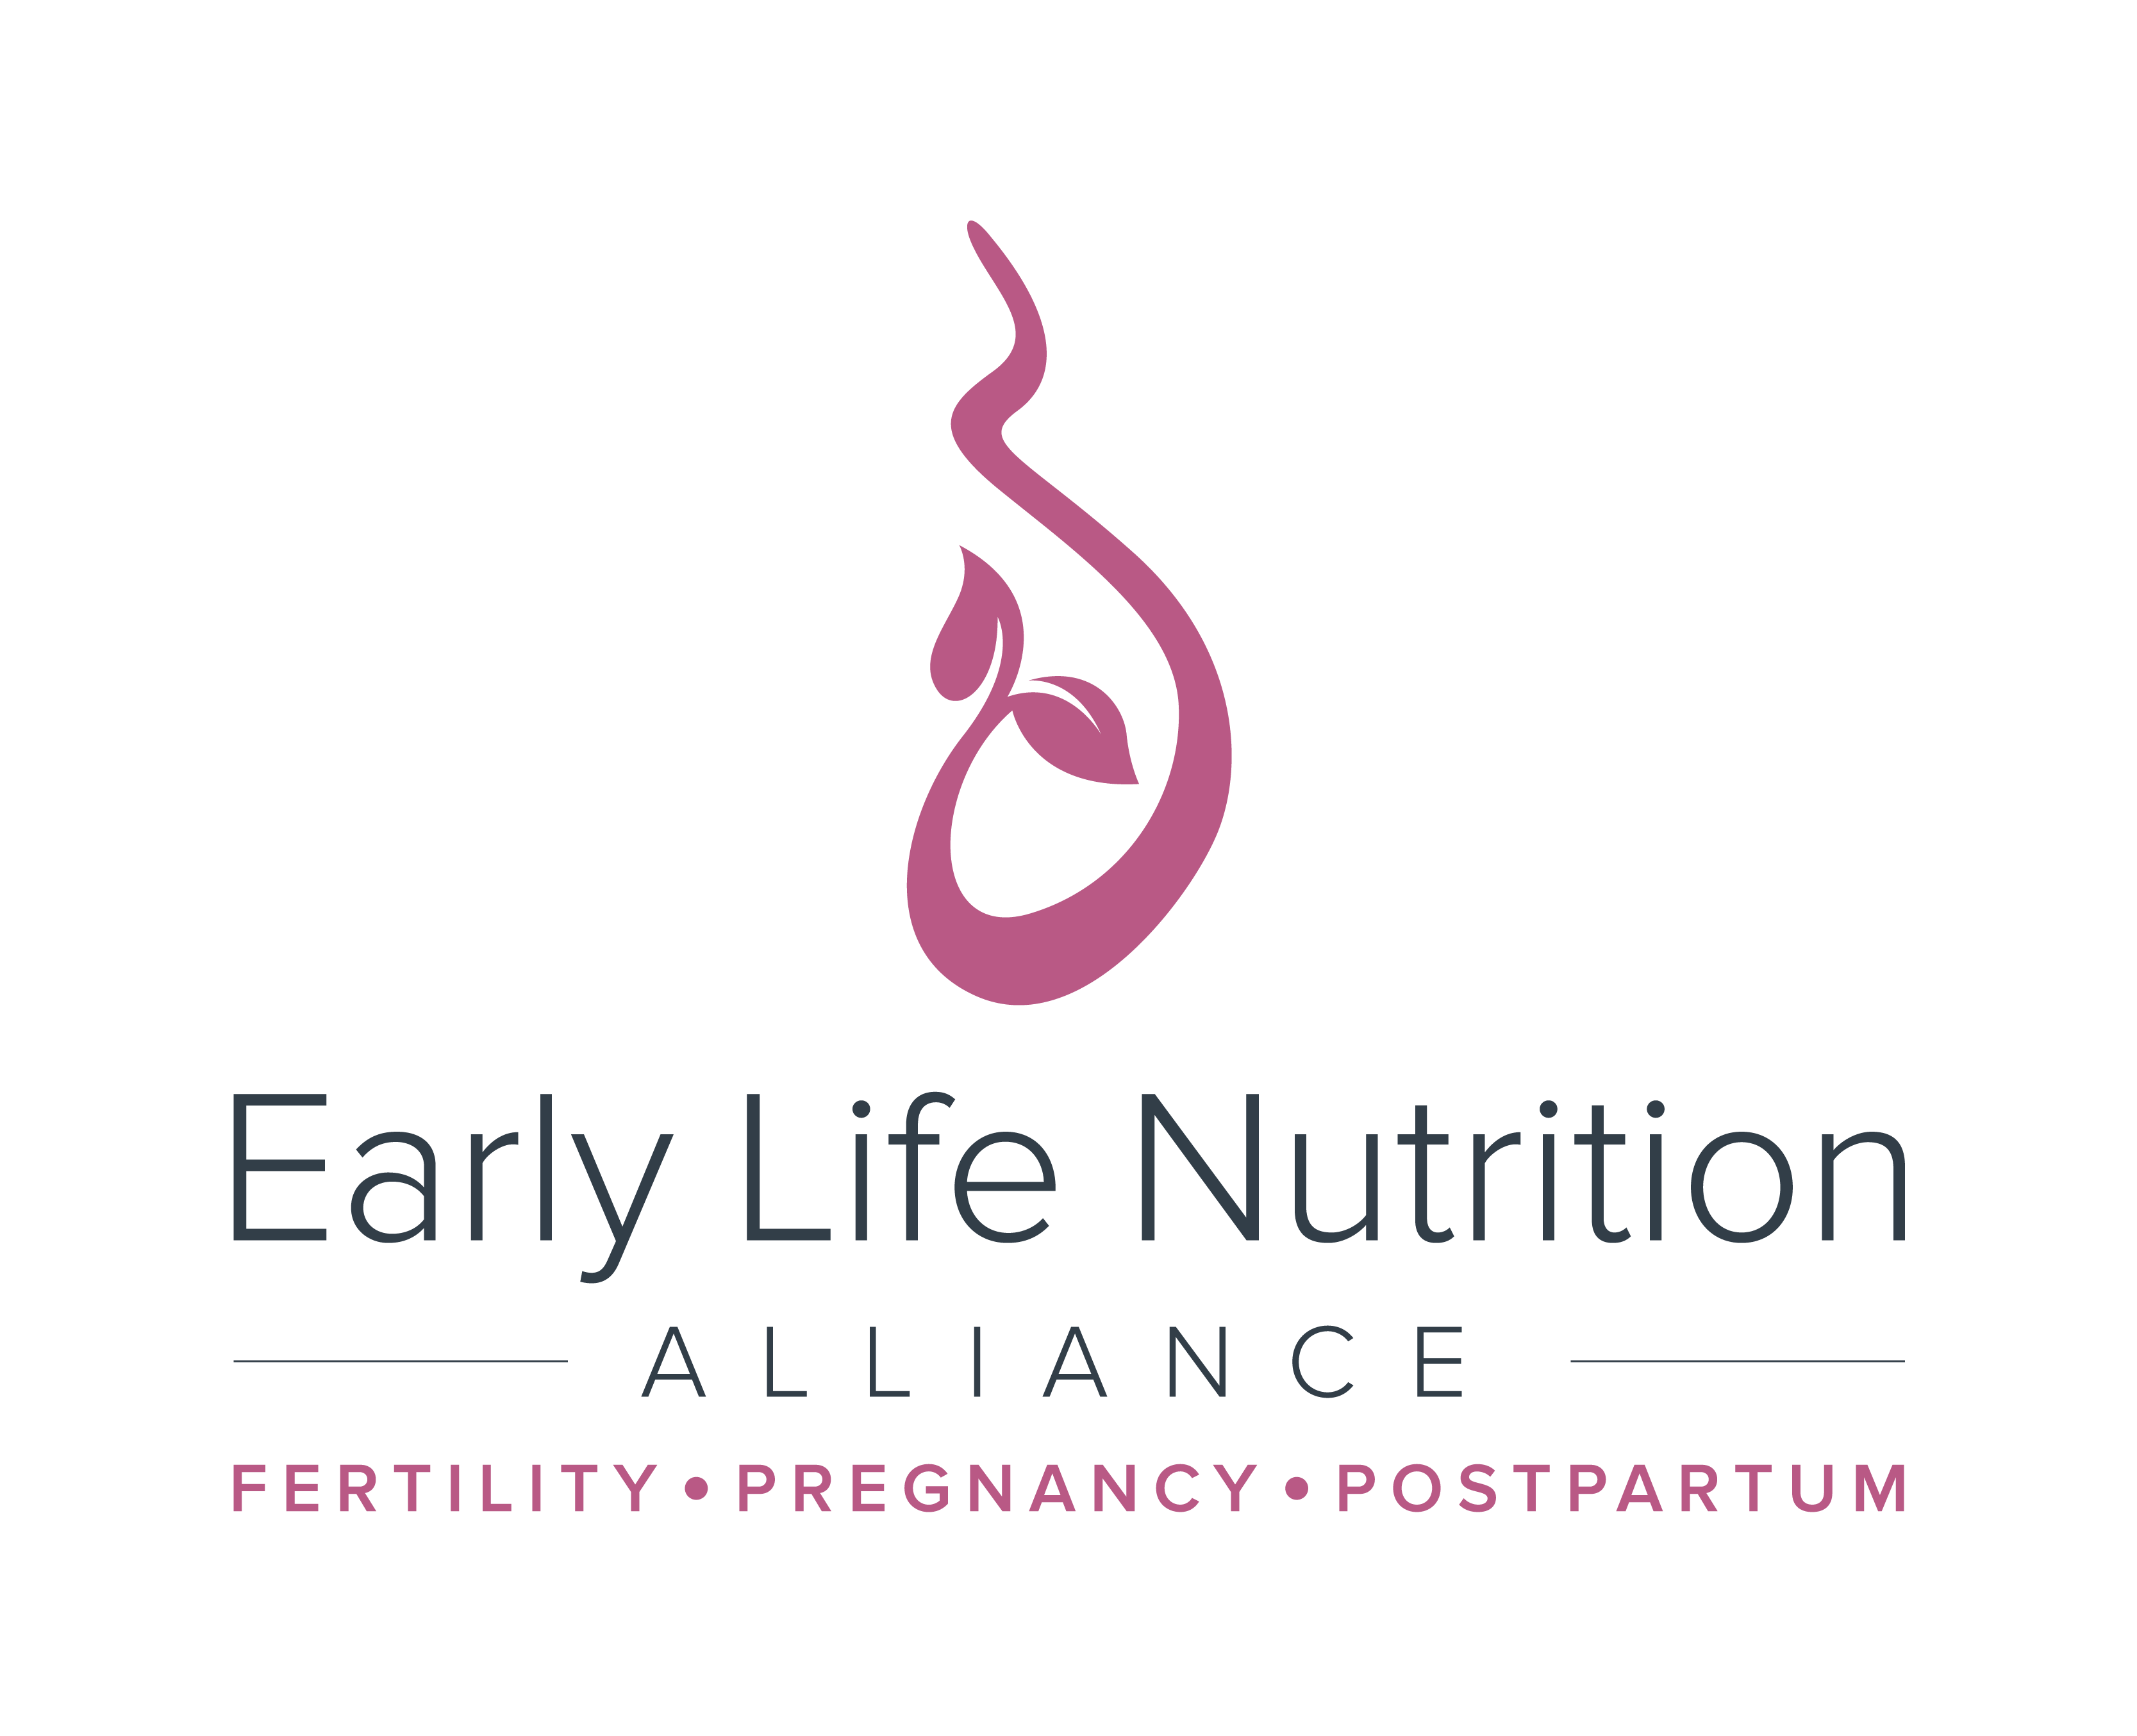 Early Life Nutrition Alliance